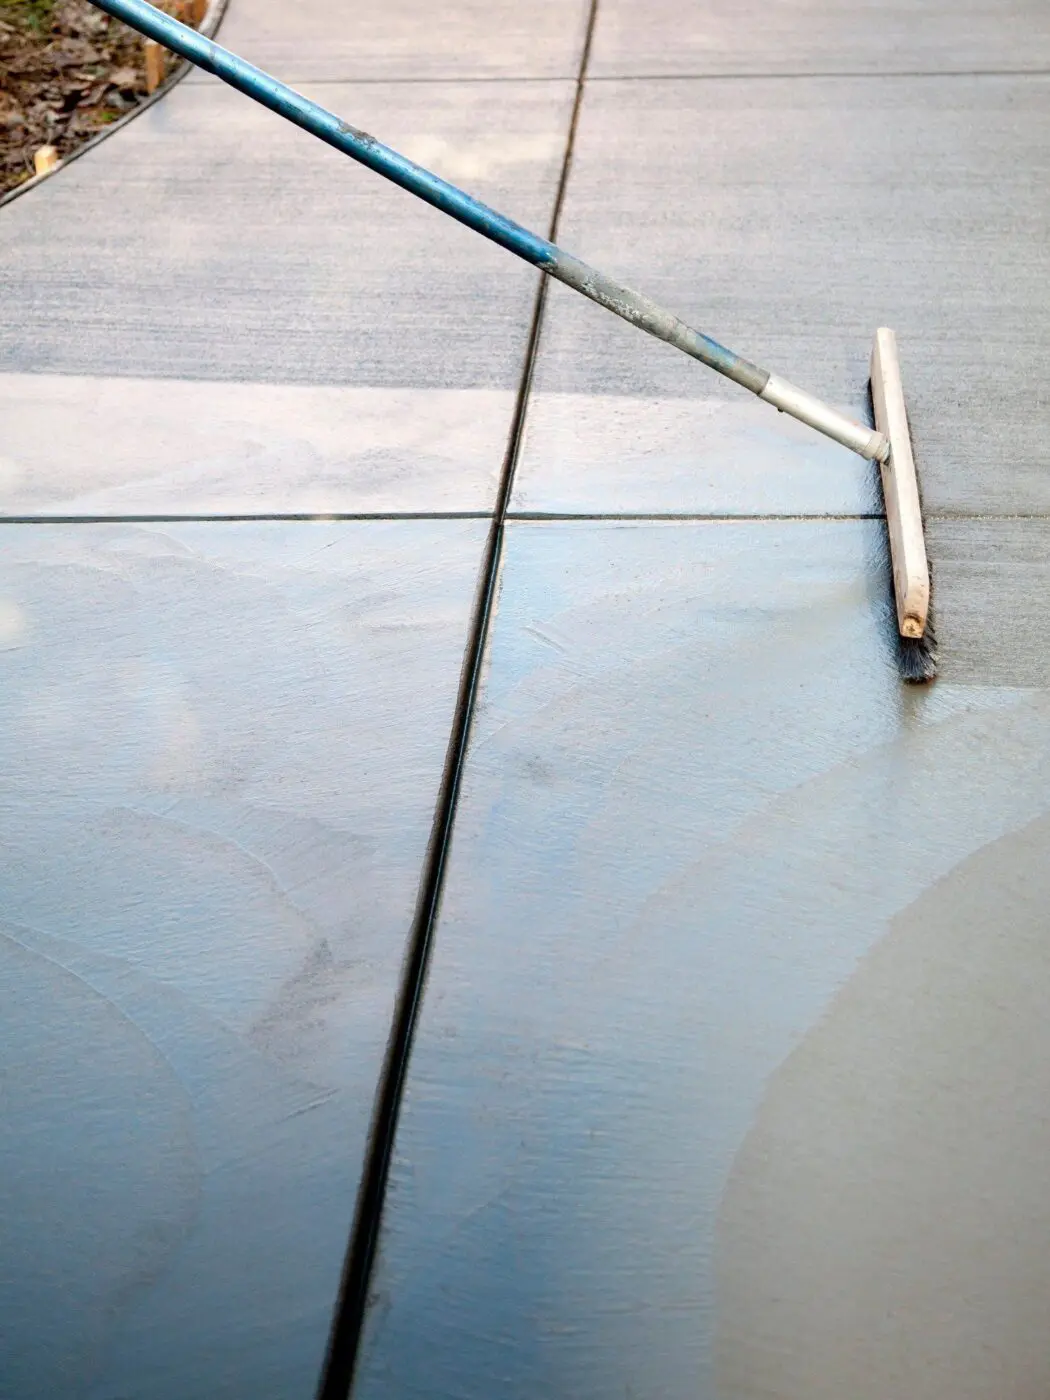 A close-up of a person using a concrete float tool to smooth and level freshly poured concrete on a sidewalk. The concrete is partially dried, and the float tool features a long handle and broad, flat head. The surface appears smooth and even. For expert services like this, contact Reno Concrete Solutions for a free quote.